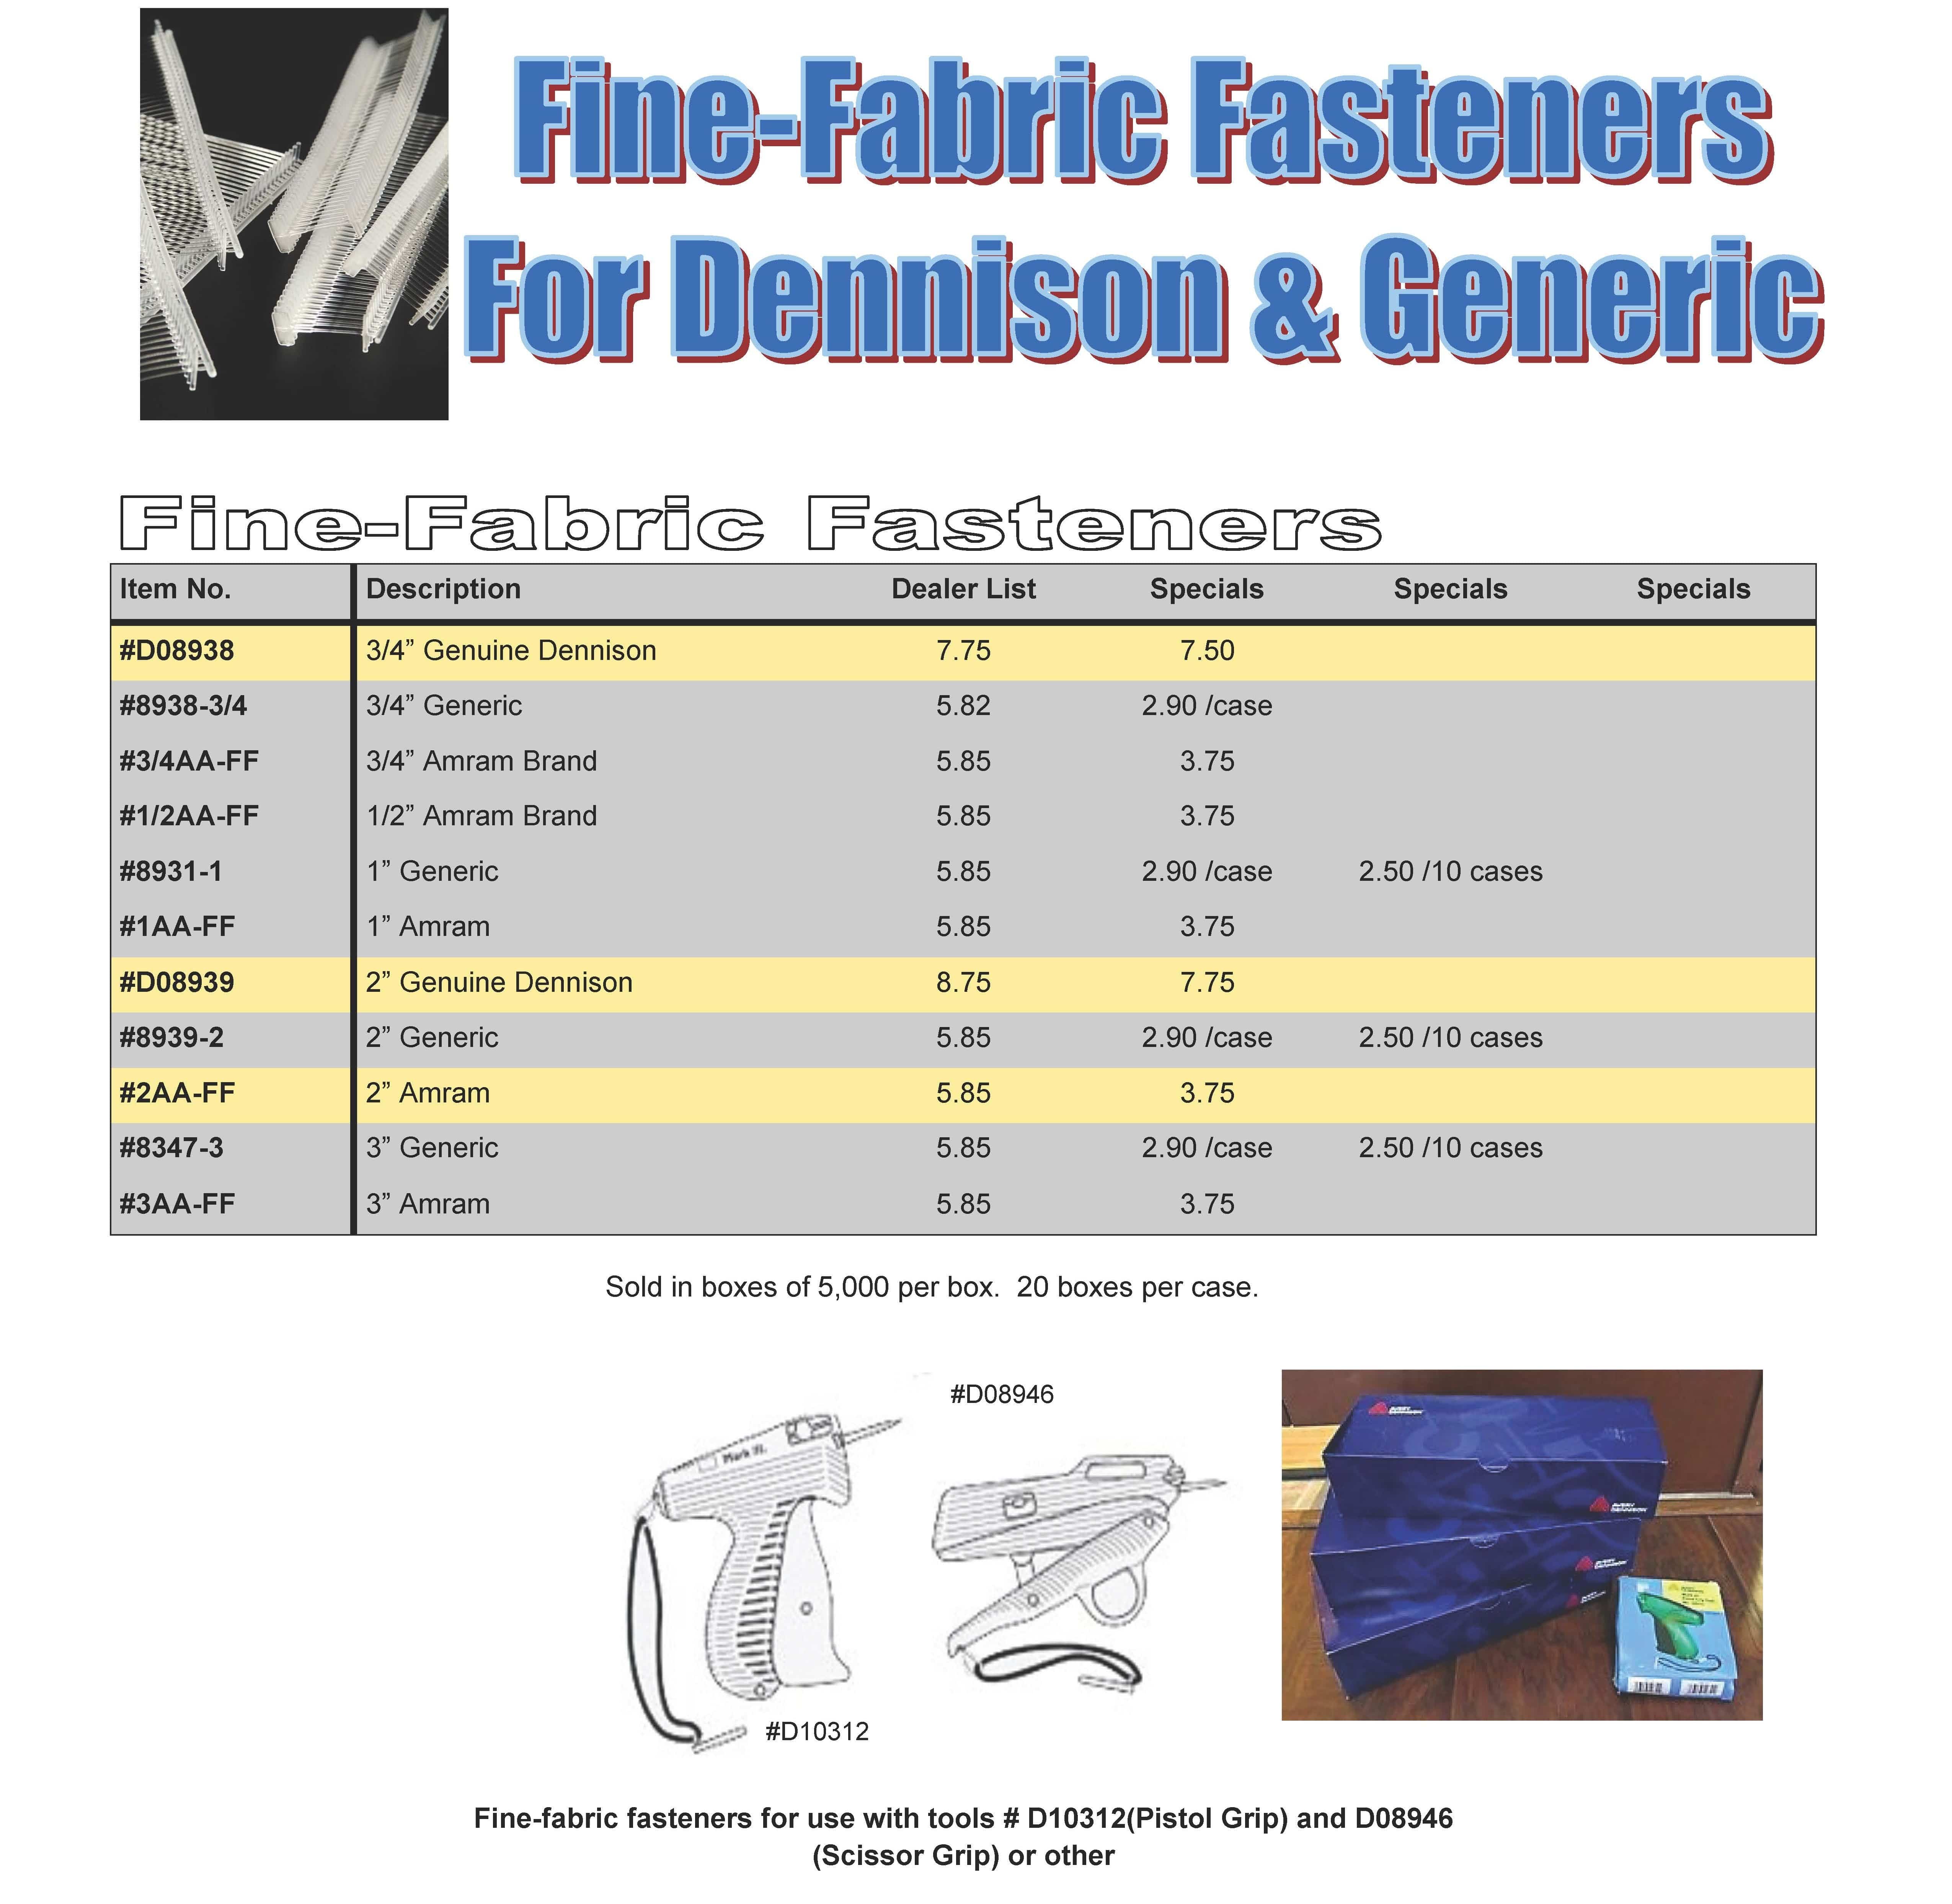  AVERY DENNISON and GENRIC FINE-FABRIC FASTENERS